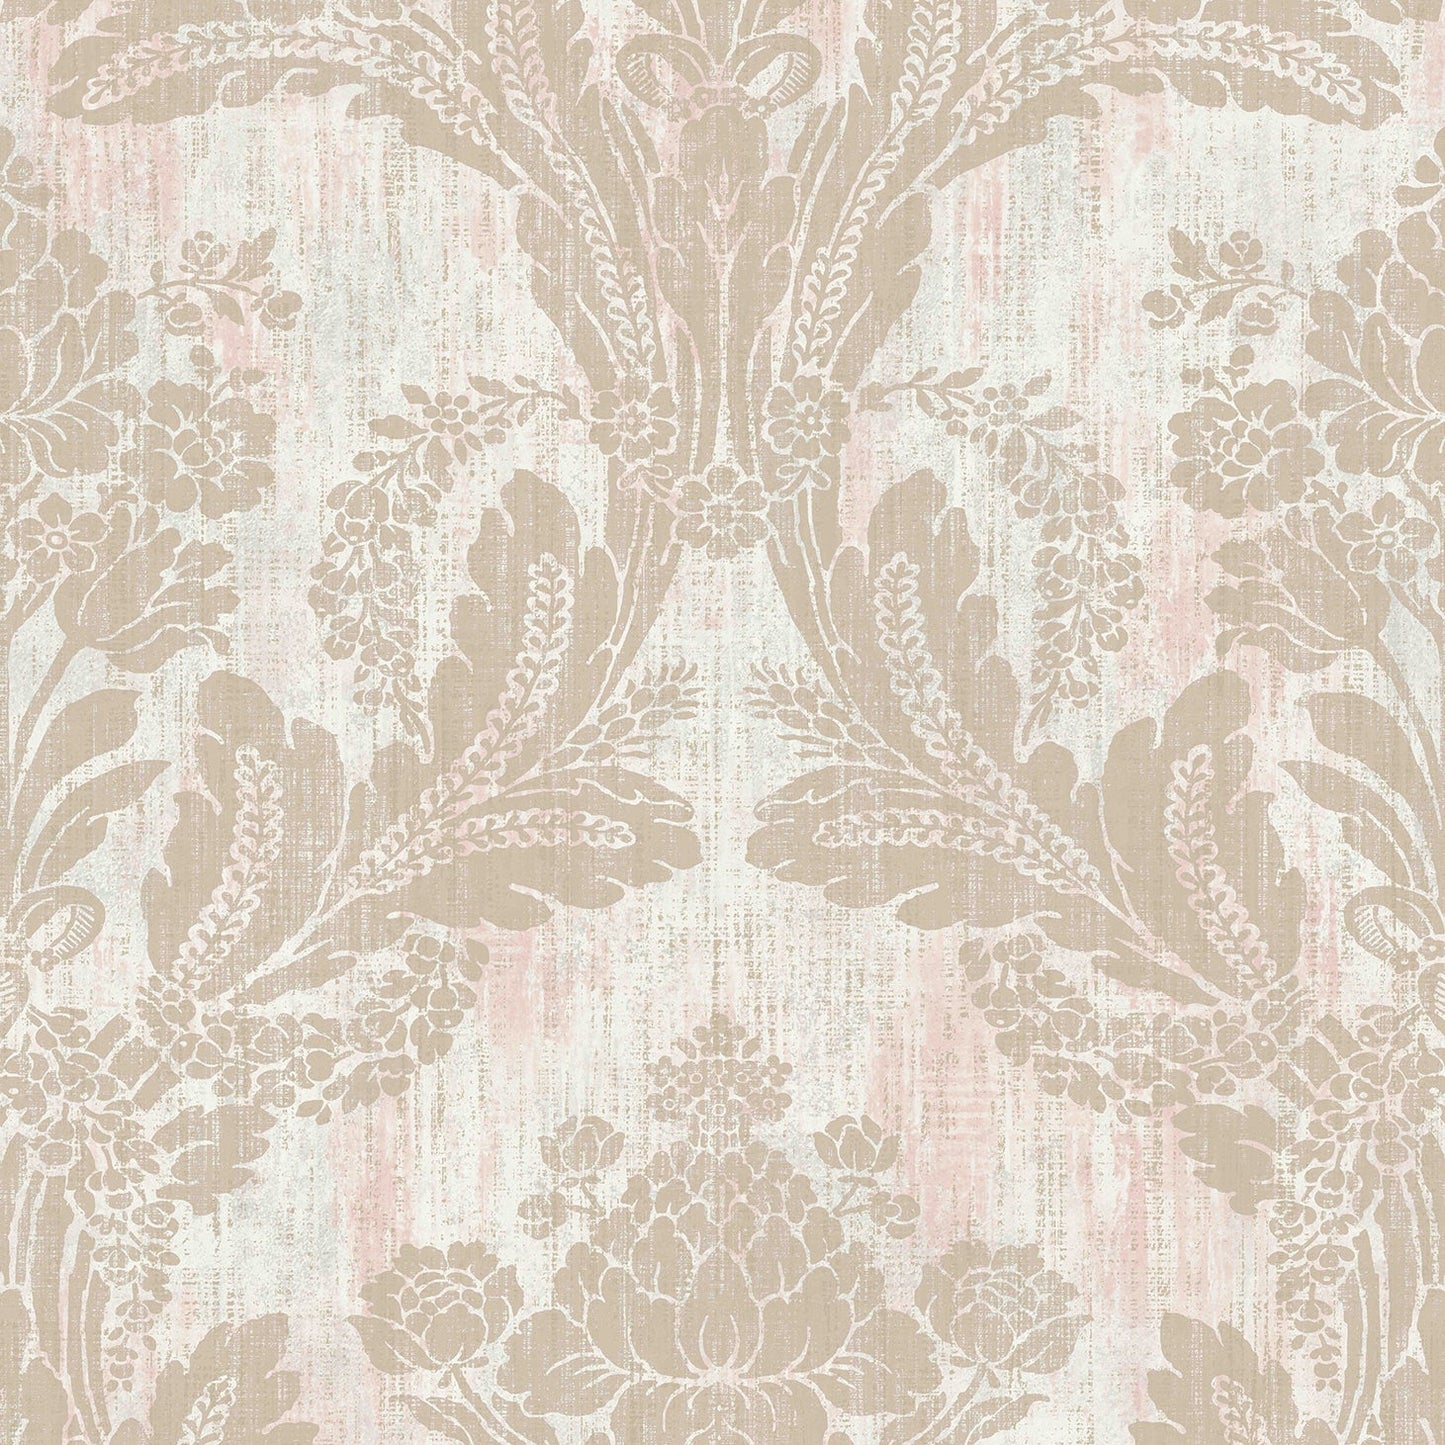 Search 2835-M1411 Deluxe Neutrals Damasks Wallpaper by Advantage